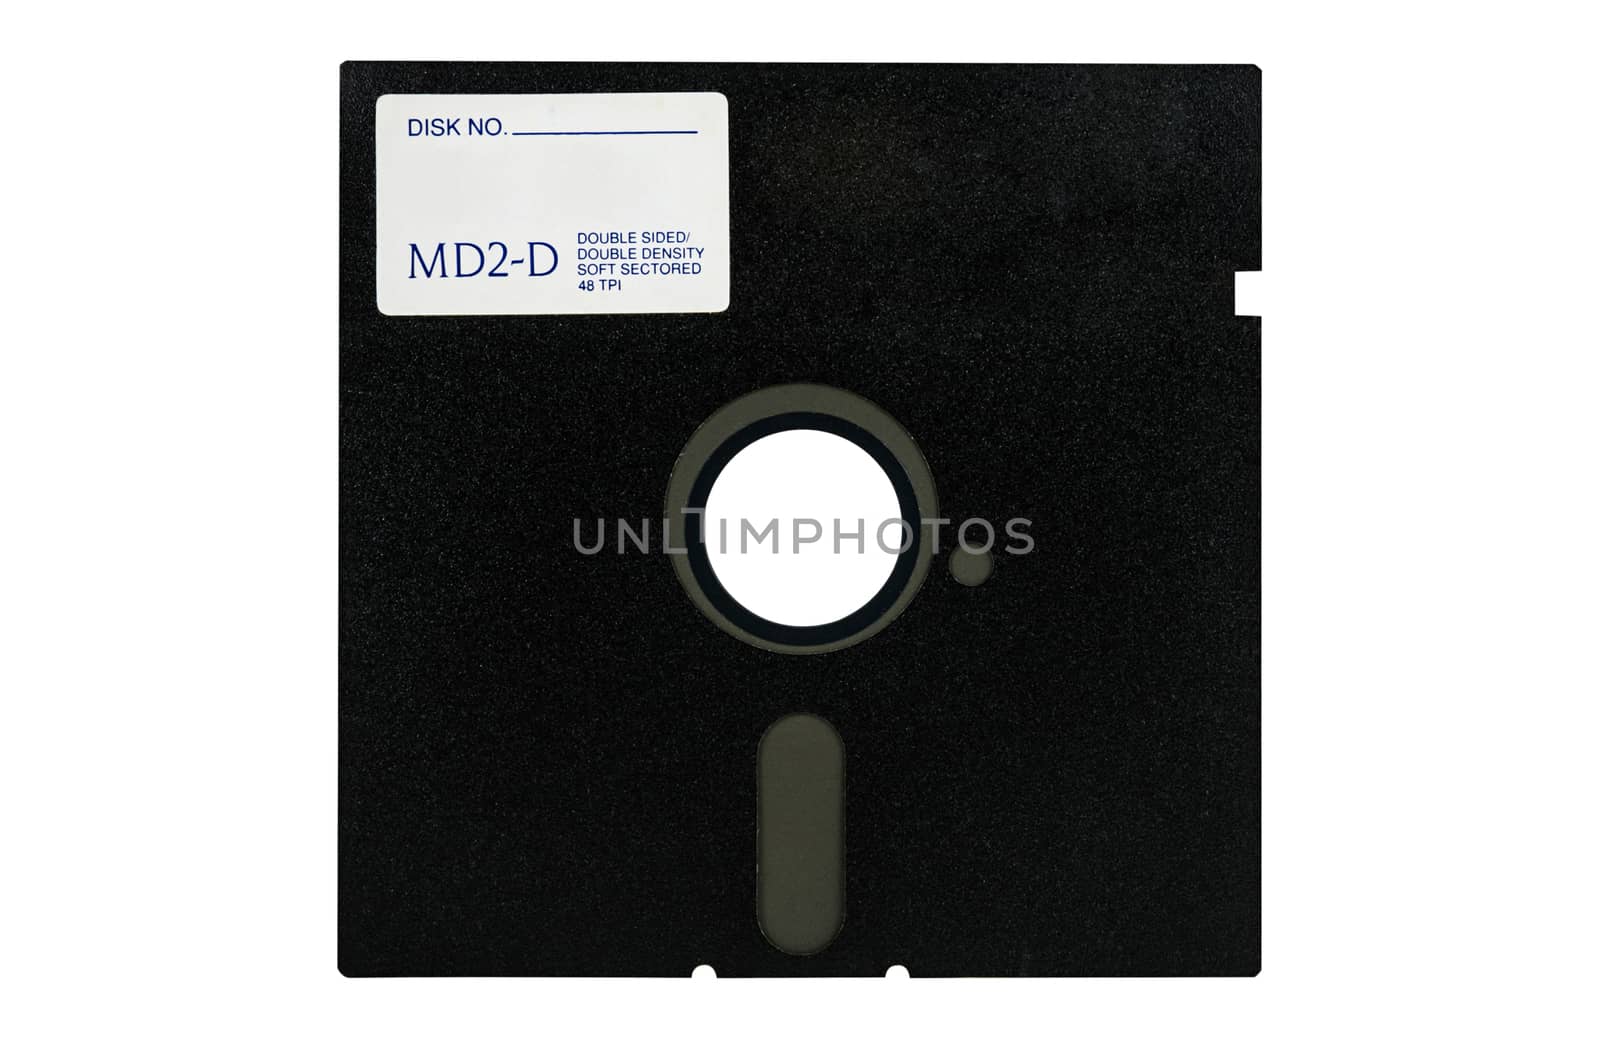 Old diskette 5 25 inches isolated on white with clipping path